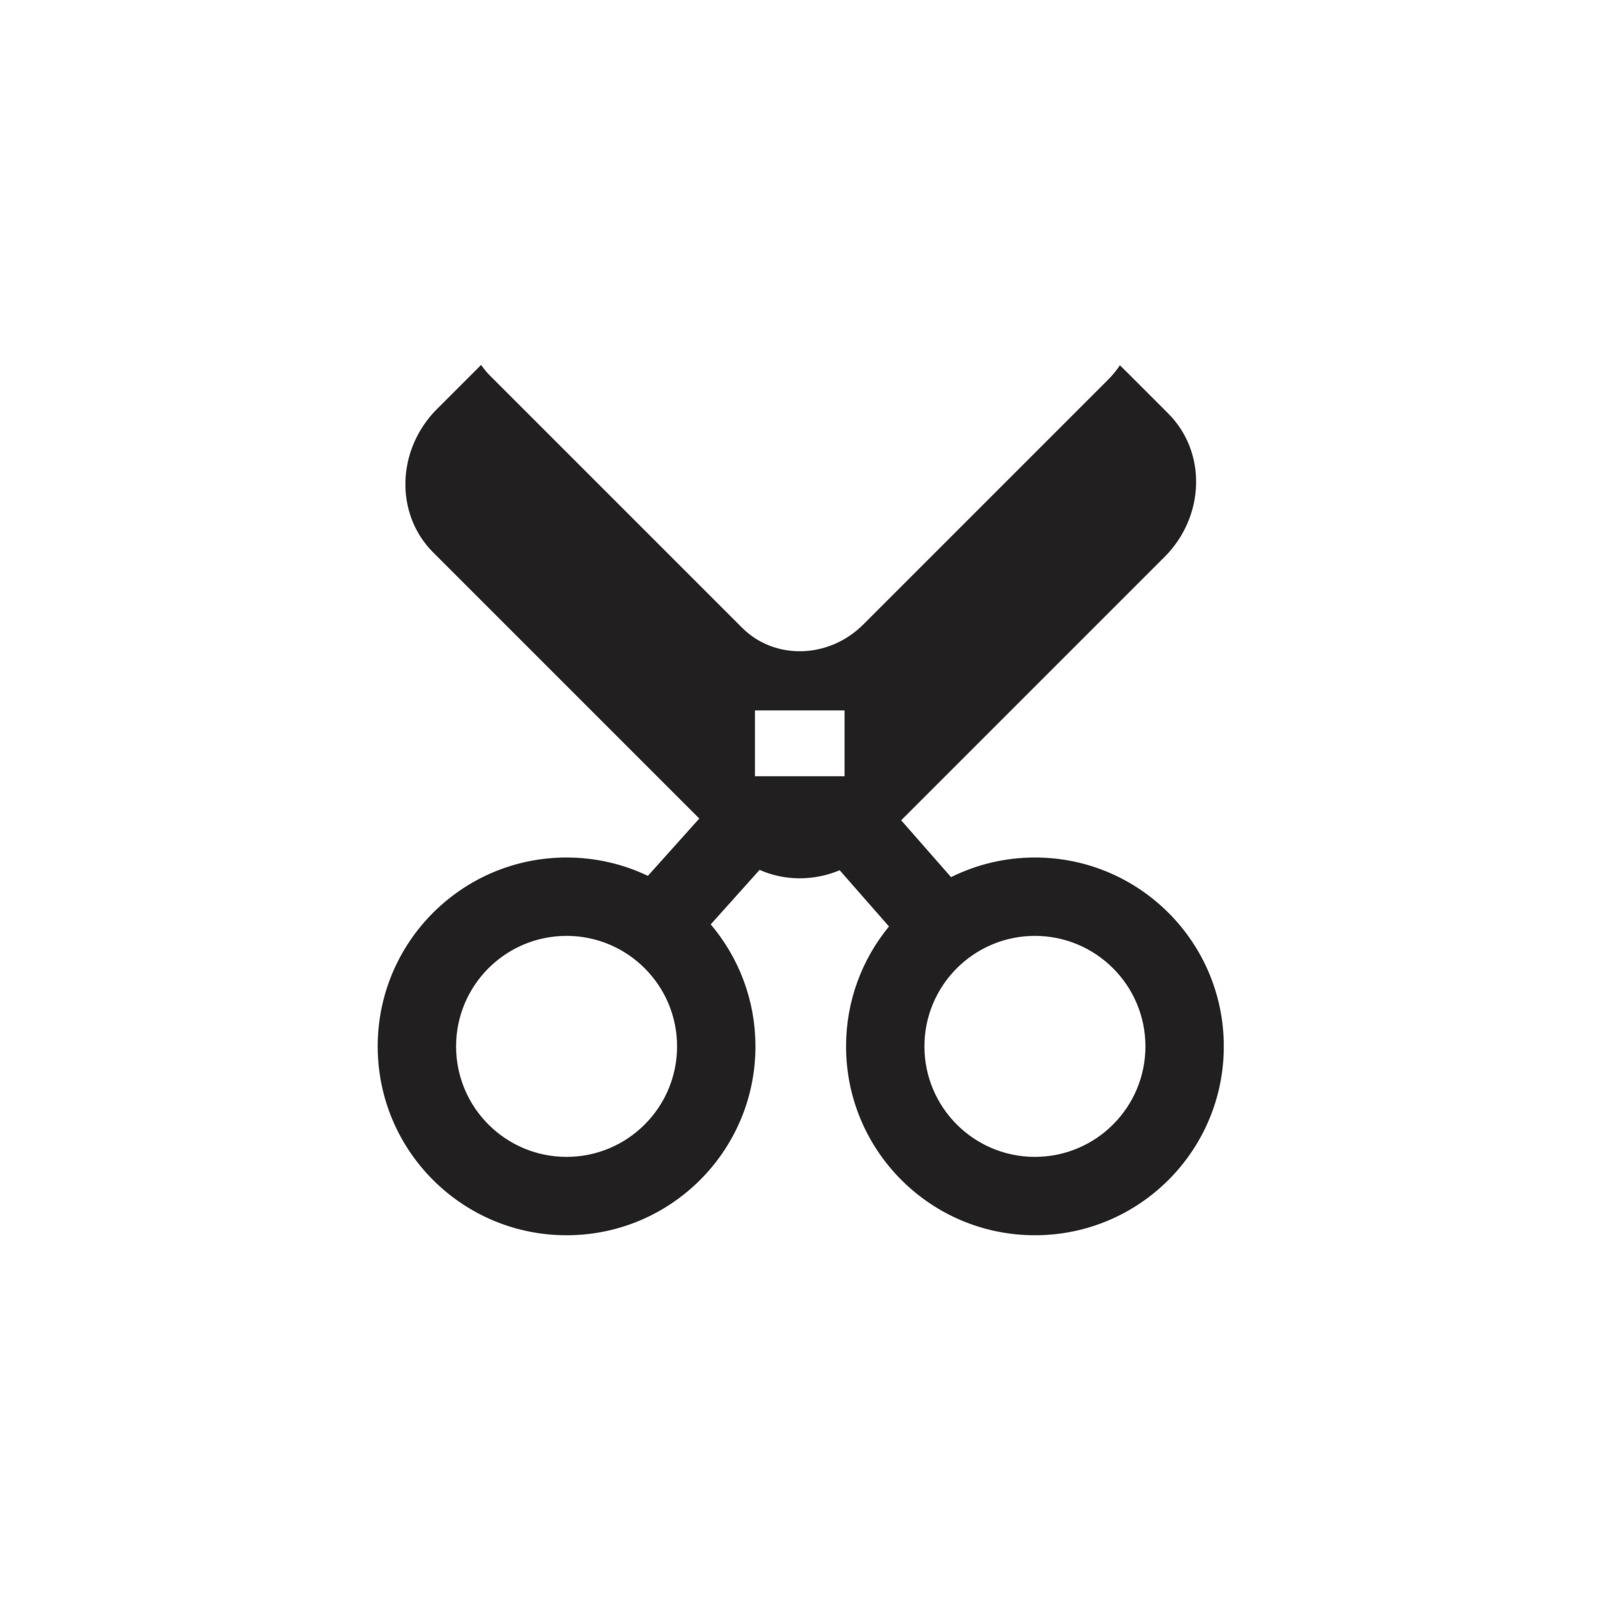 Scissors icon by iconmama